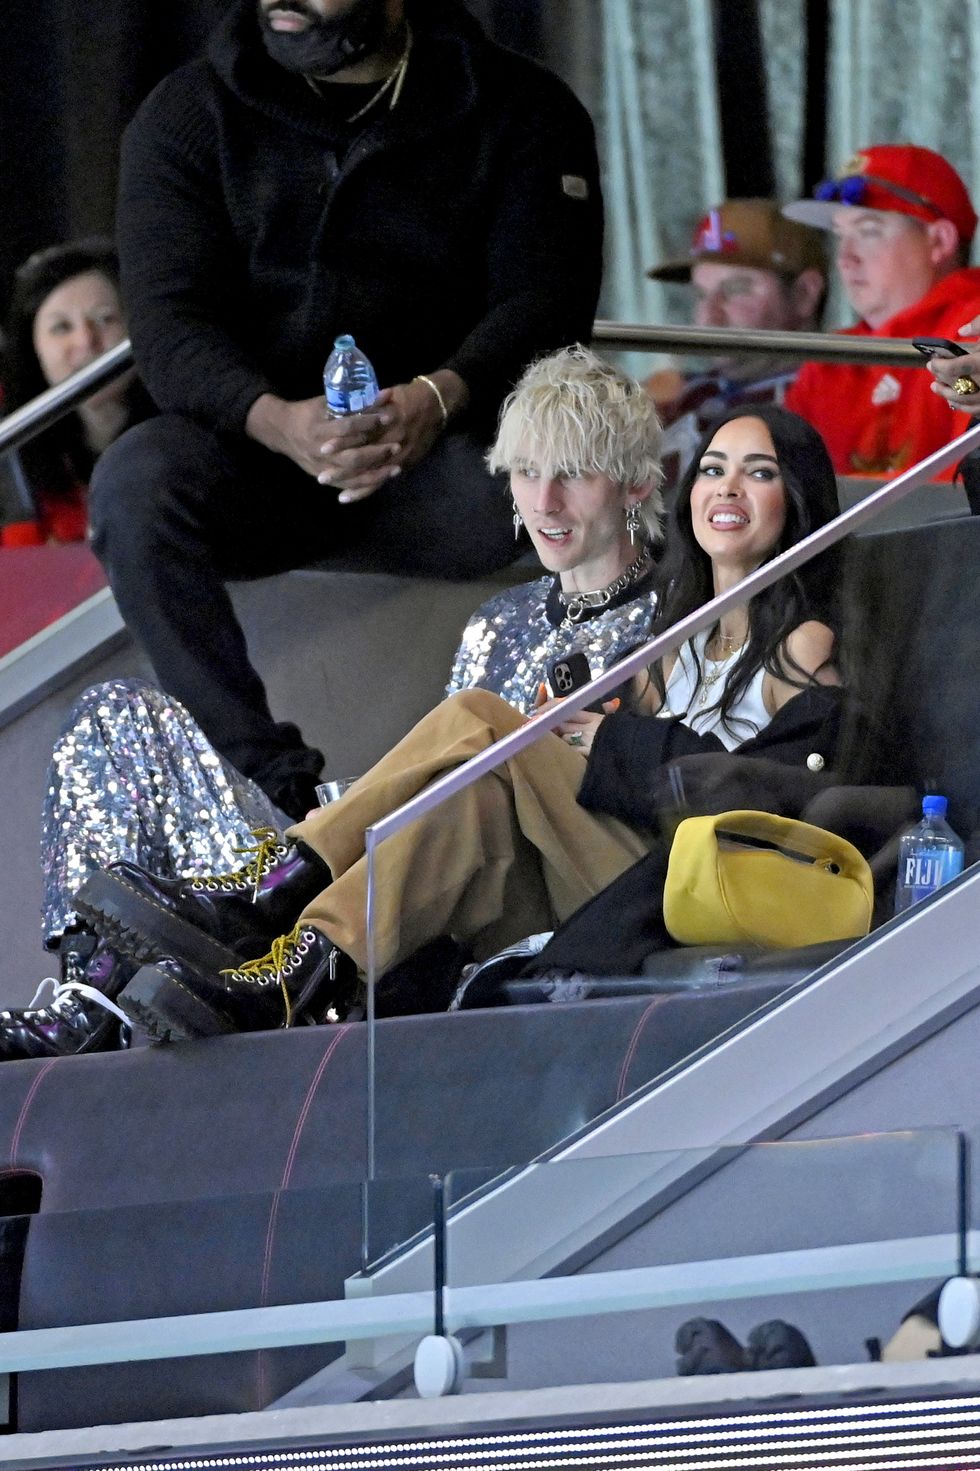 las vegas, nevada   february 05 l r machine gun kelly and megan fox are seen in the stands after his performance during the 2022 honda nhl all star game at t mobile arena on february 05, 2022 in las vegas, nevada photo by david beckergetty images